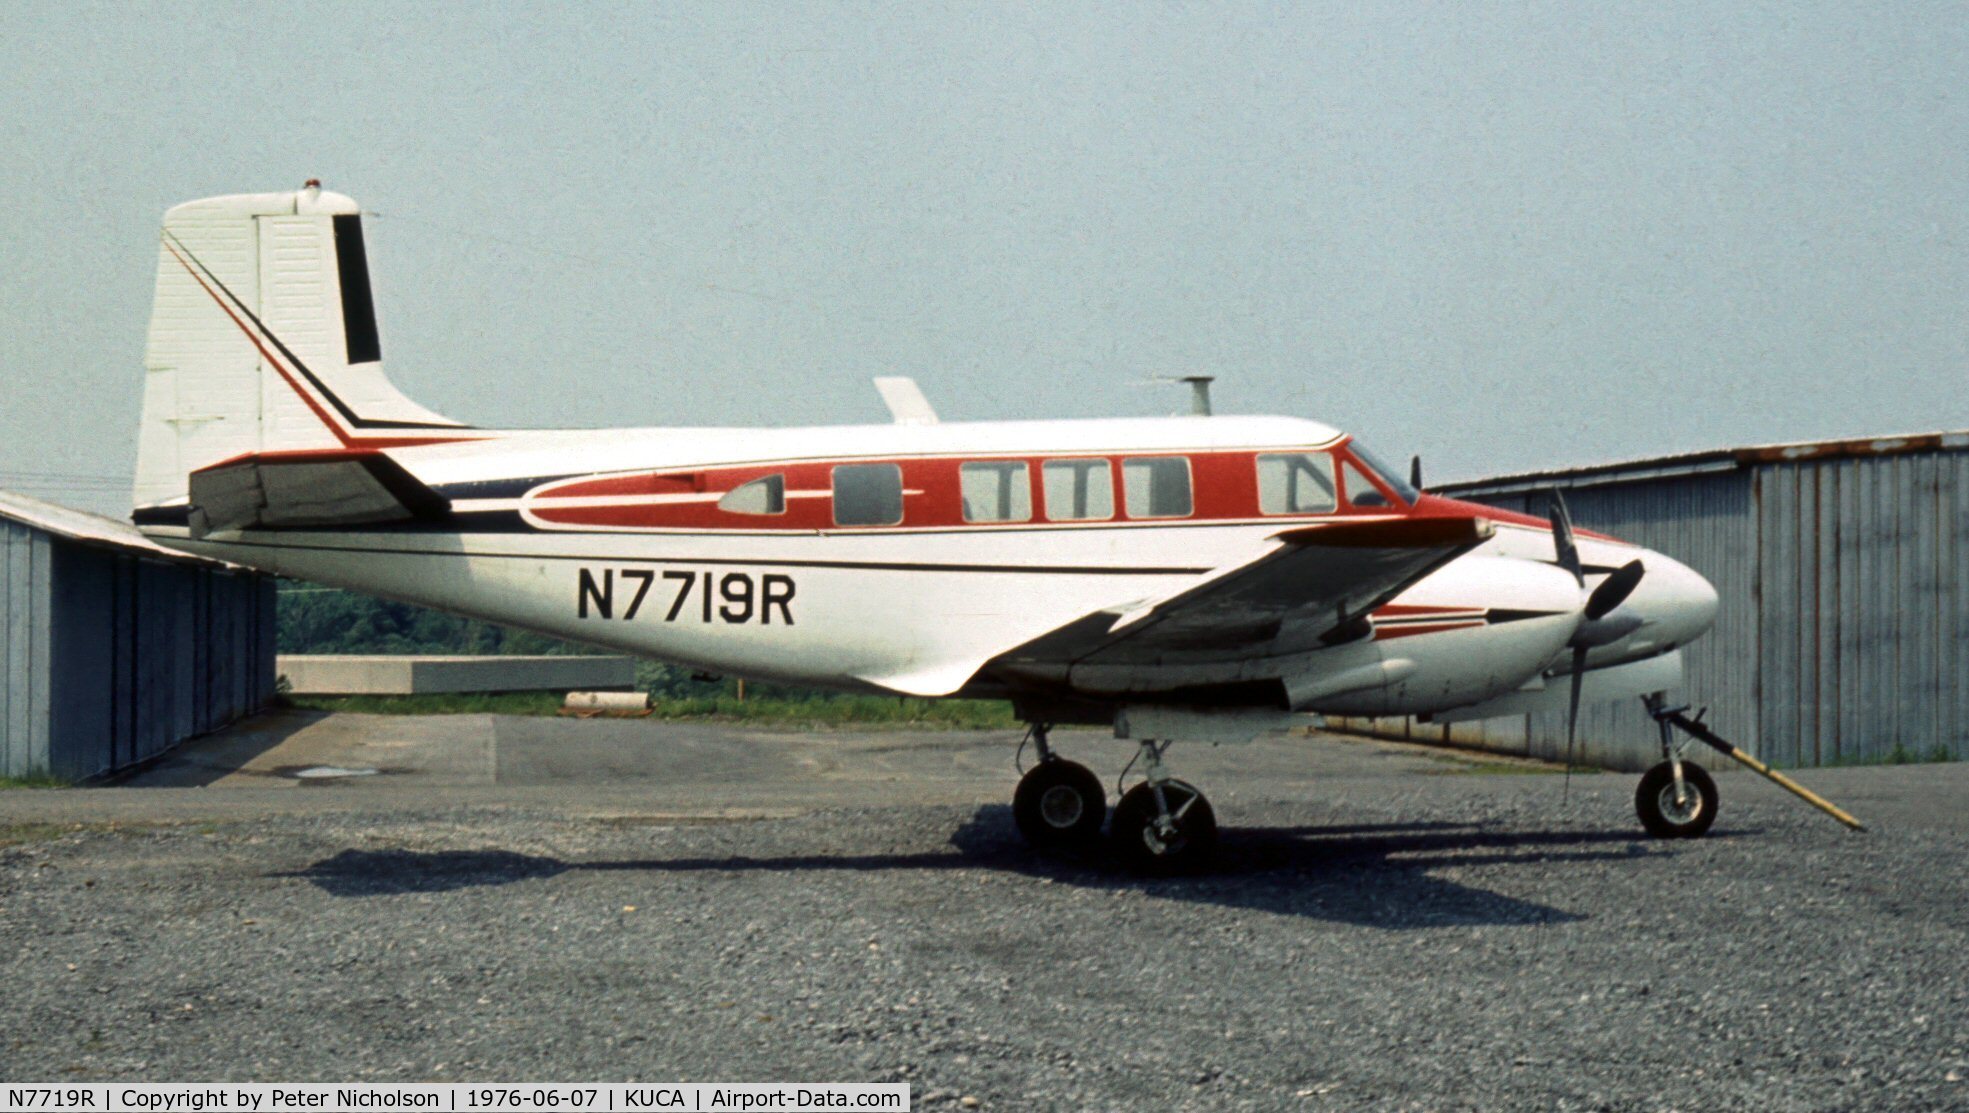 N7719R, 1965 Beech 65 C/N LC-190, This Twin Bonanza was seen at Oneida County Airport, New York State in 1976 - airport later closed in 2007.